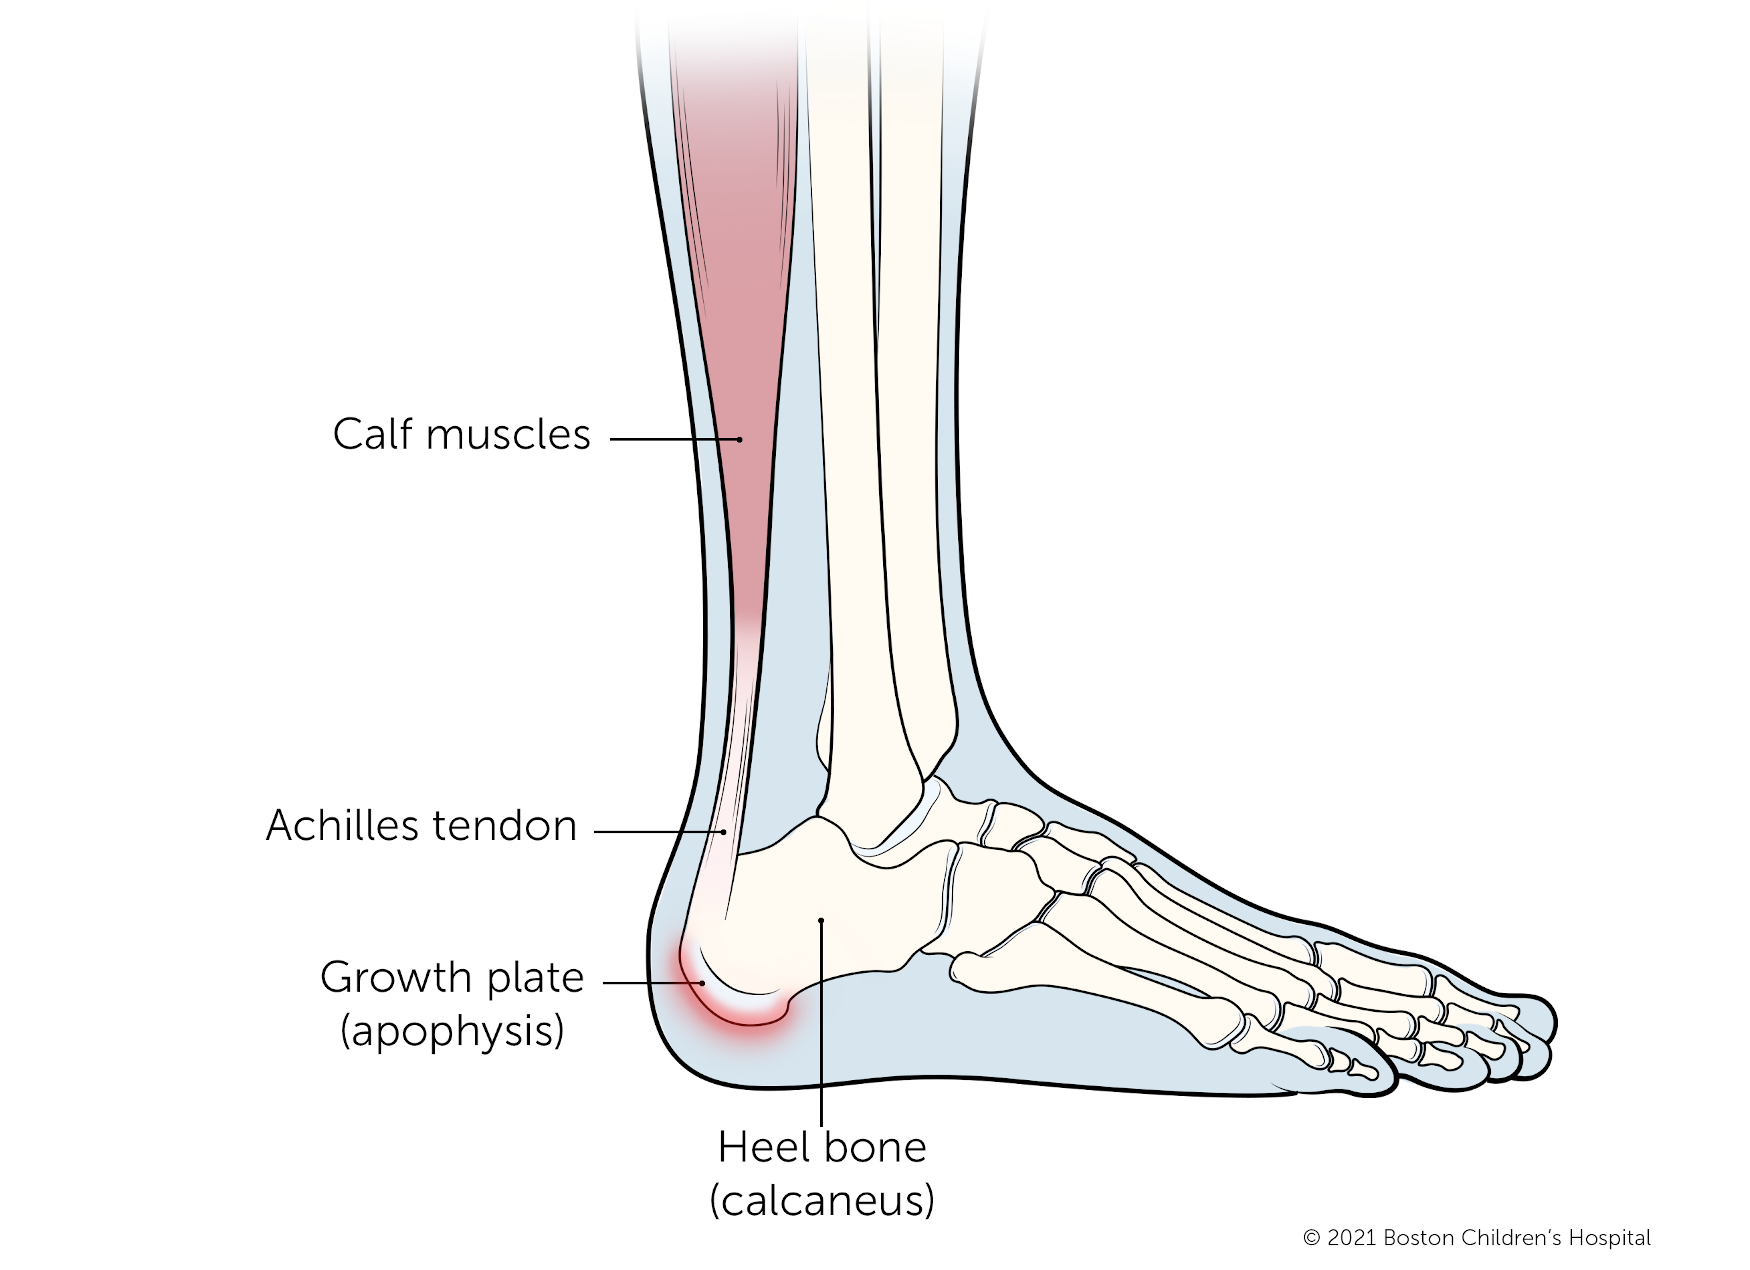 2 Major Causes of Heel Pain | Leading Edge Physiotherapy St Albert |  Edmonton Physical Therapy